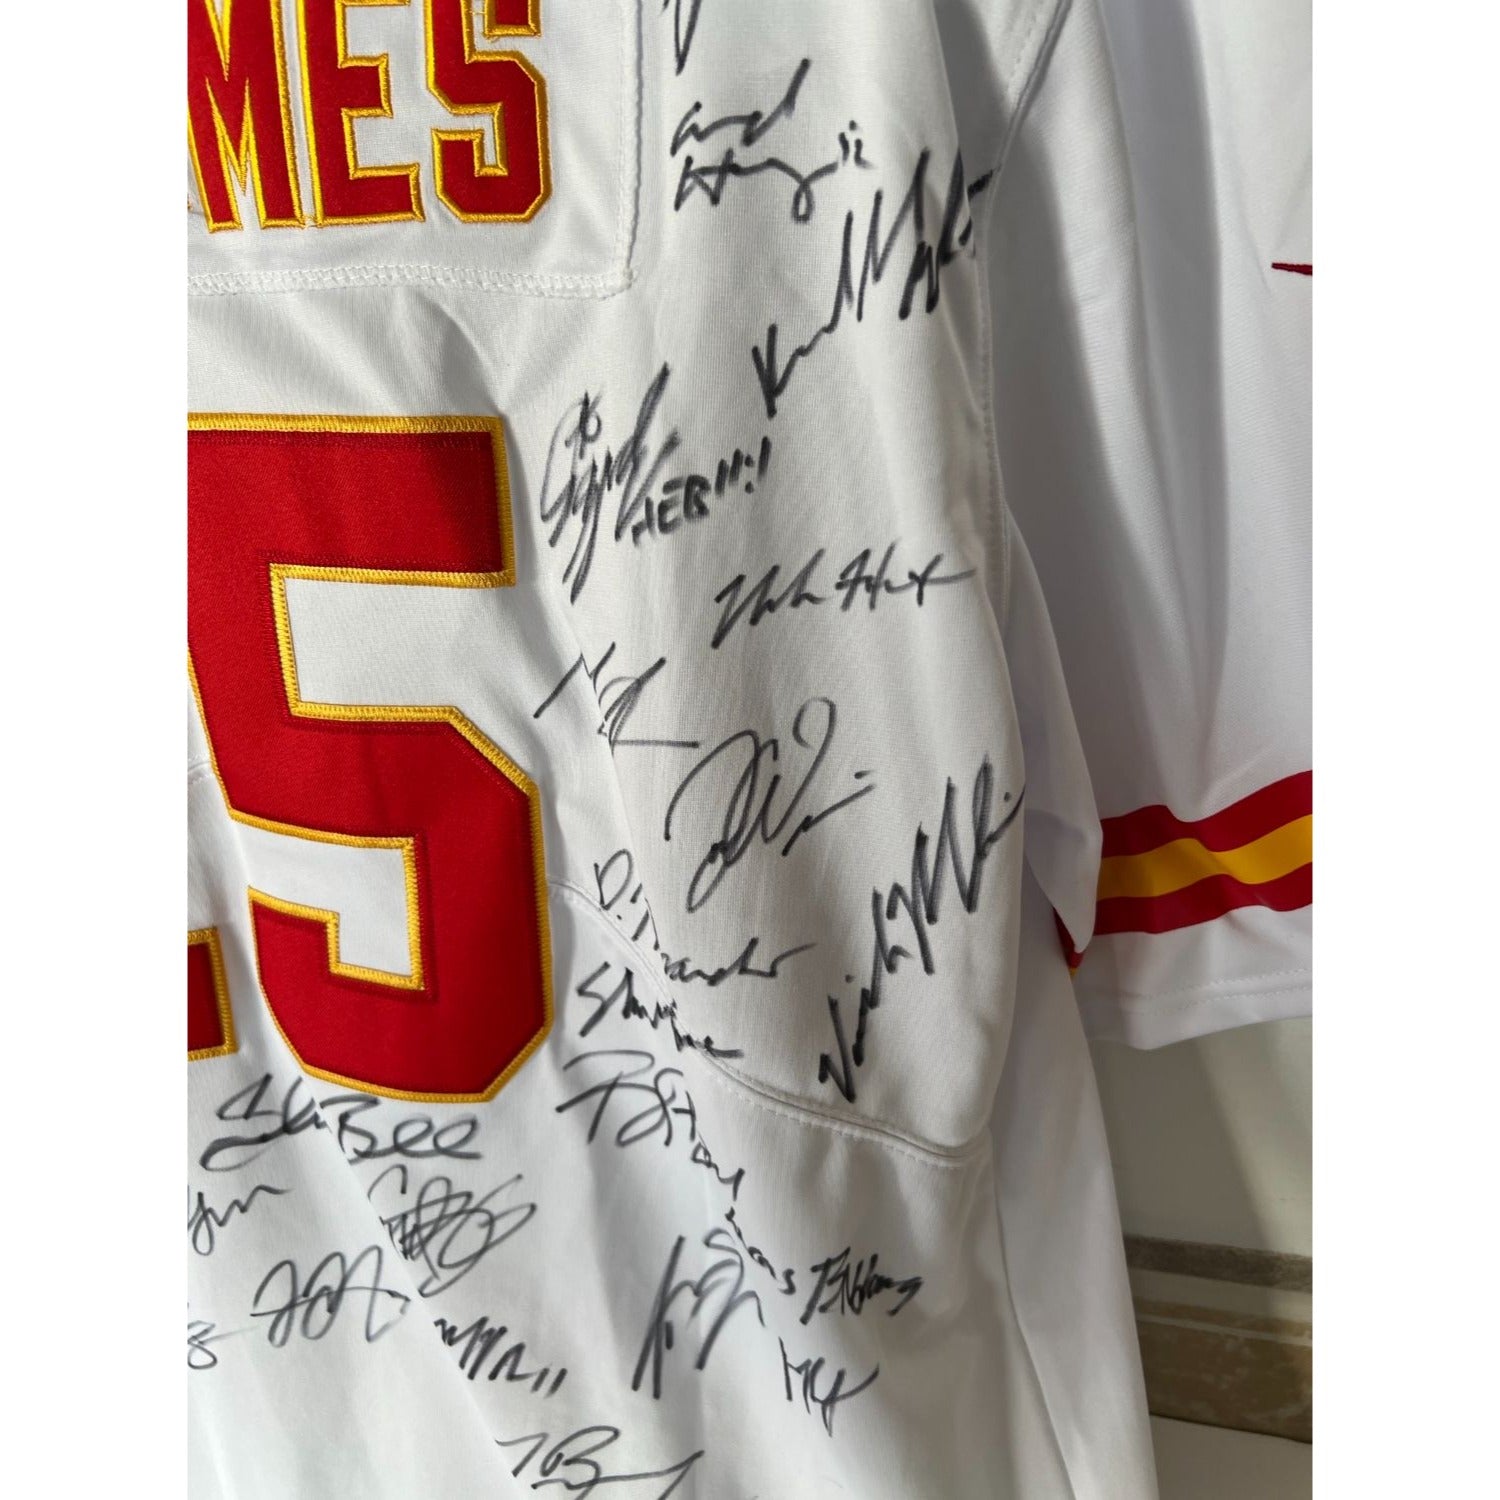 Awesome Artifacts Patrick Mahomes Andy Reid Travis Kelce 2022-23 Kansas City Chiefs Authentic Patrick Mahomes Jersey Signed with Proof by Awesome Artifact